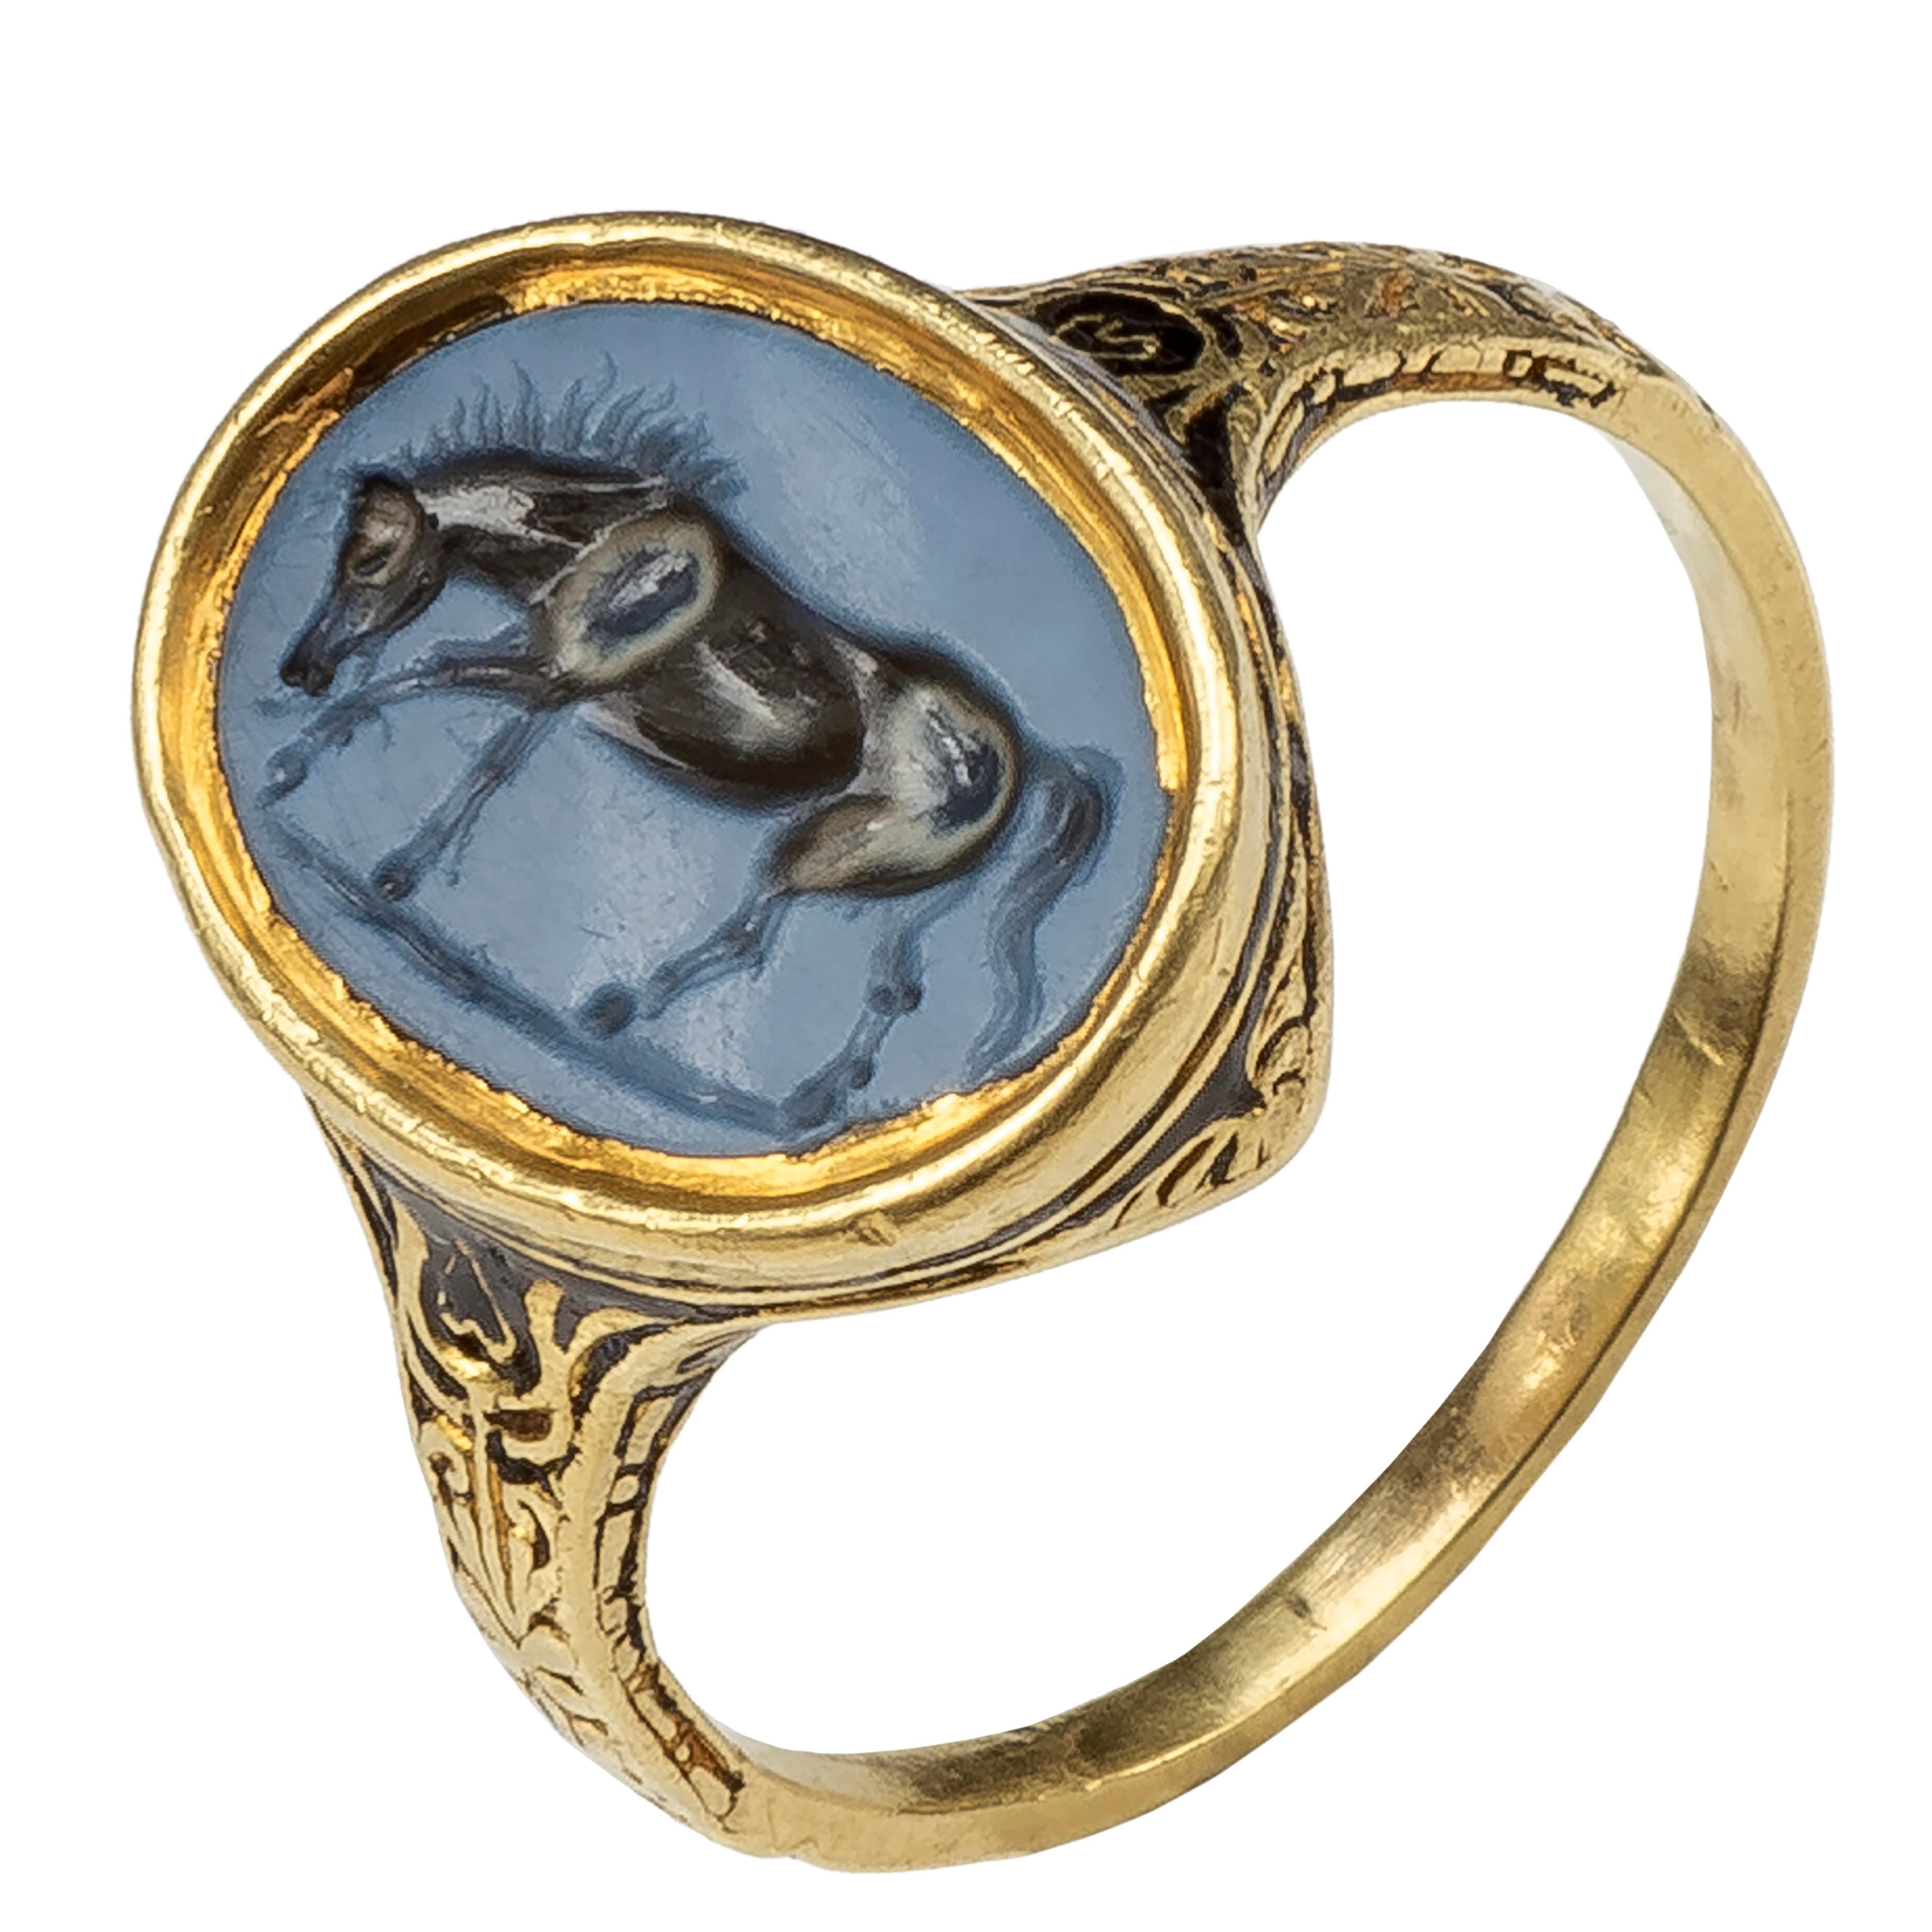 Uncut Gold Renaissance Ring with Roman Agate Intaglio Depicting a Horse For Sale